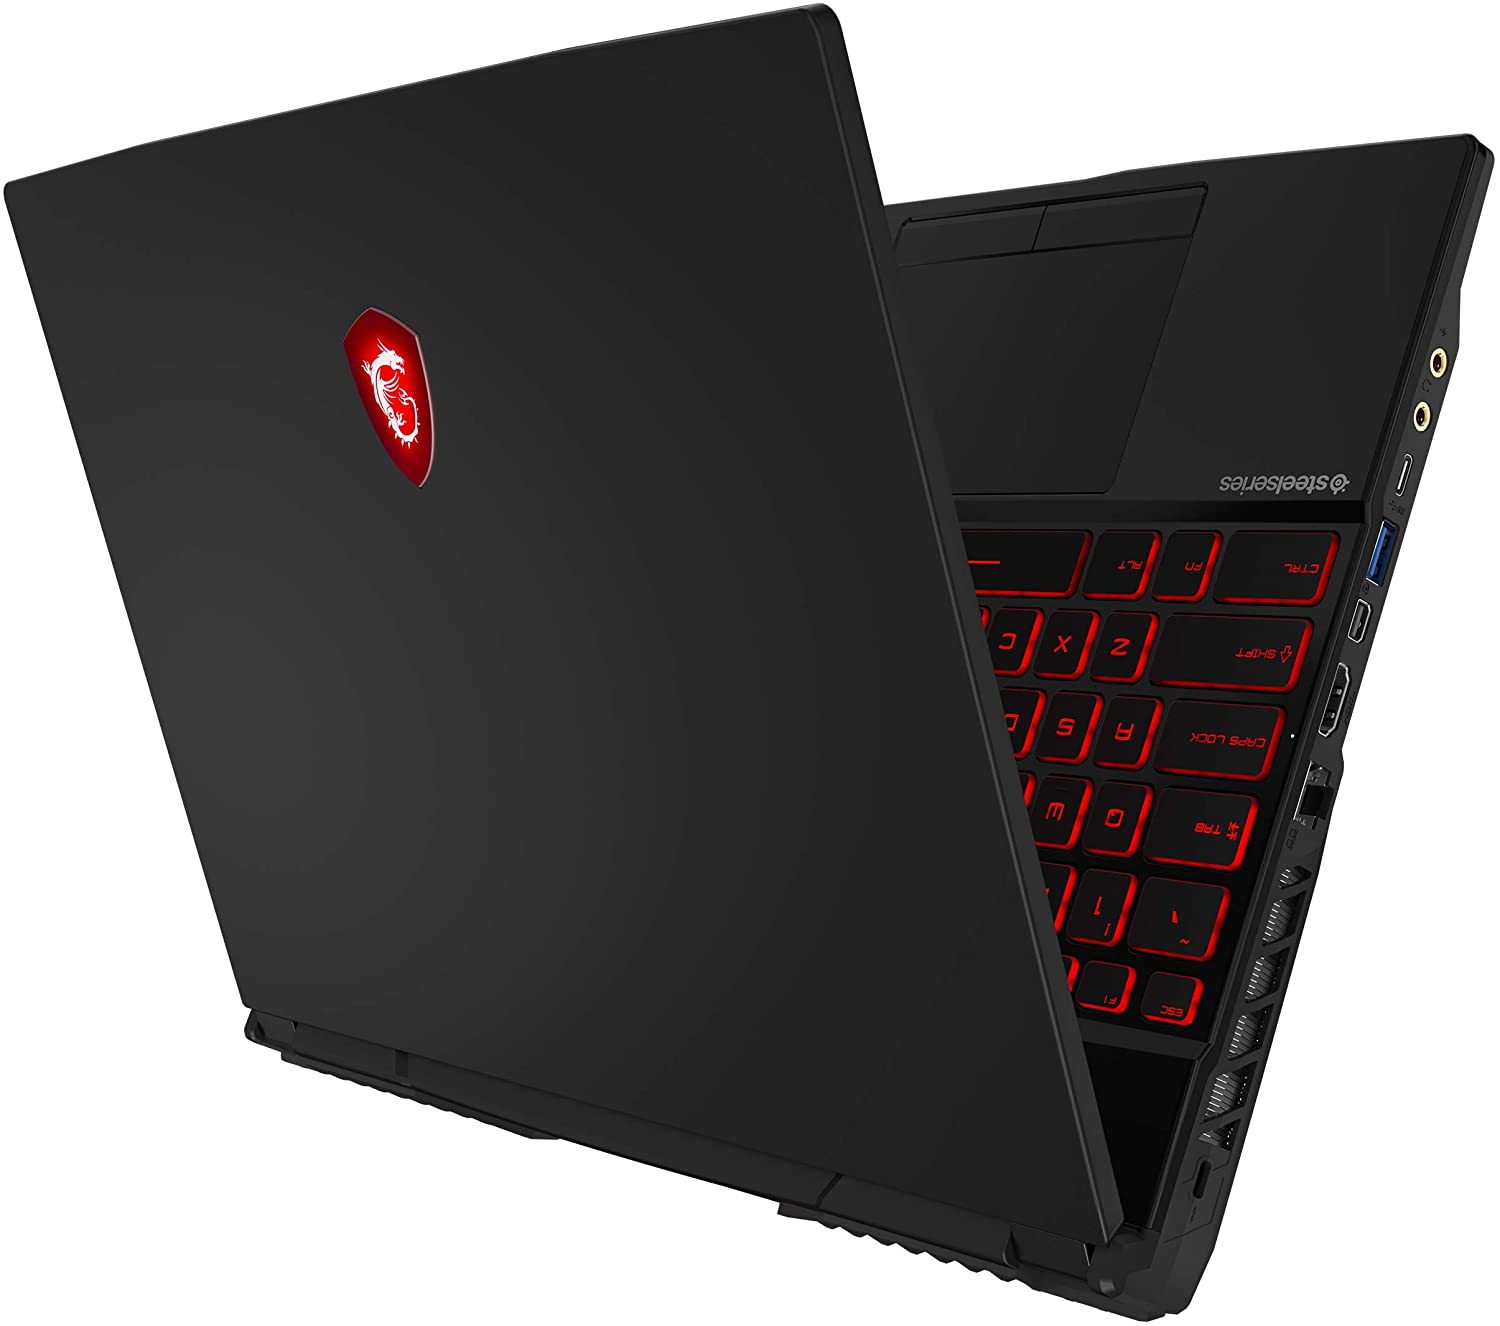 MSI Gaming Laptop N.D.S. Care for the Sailor in the port of Valencia